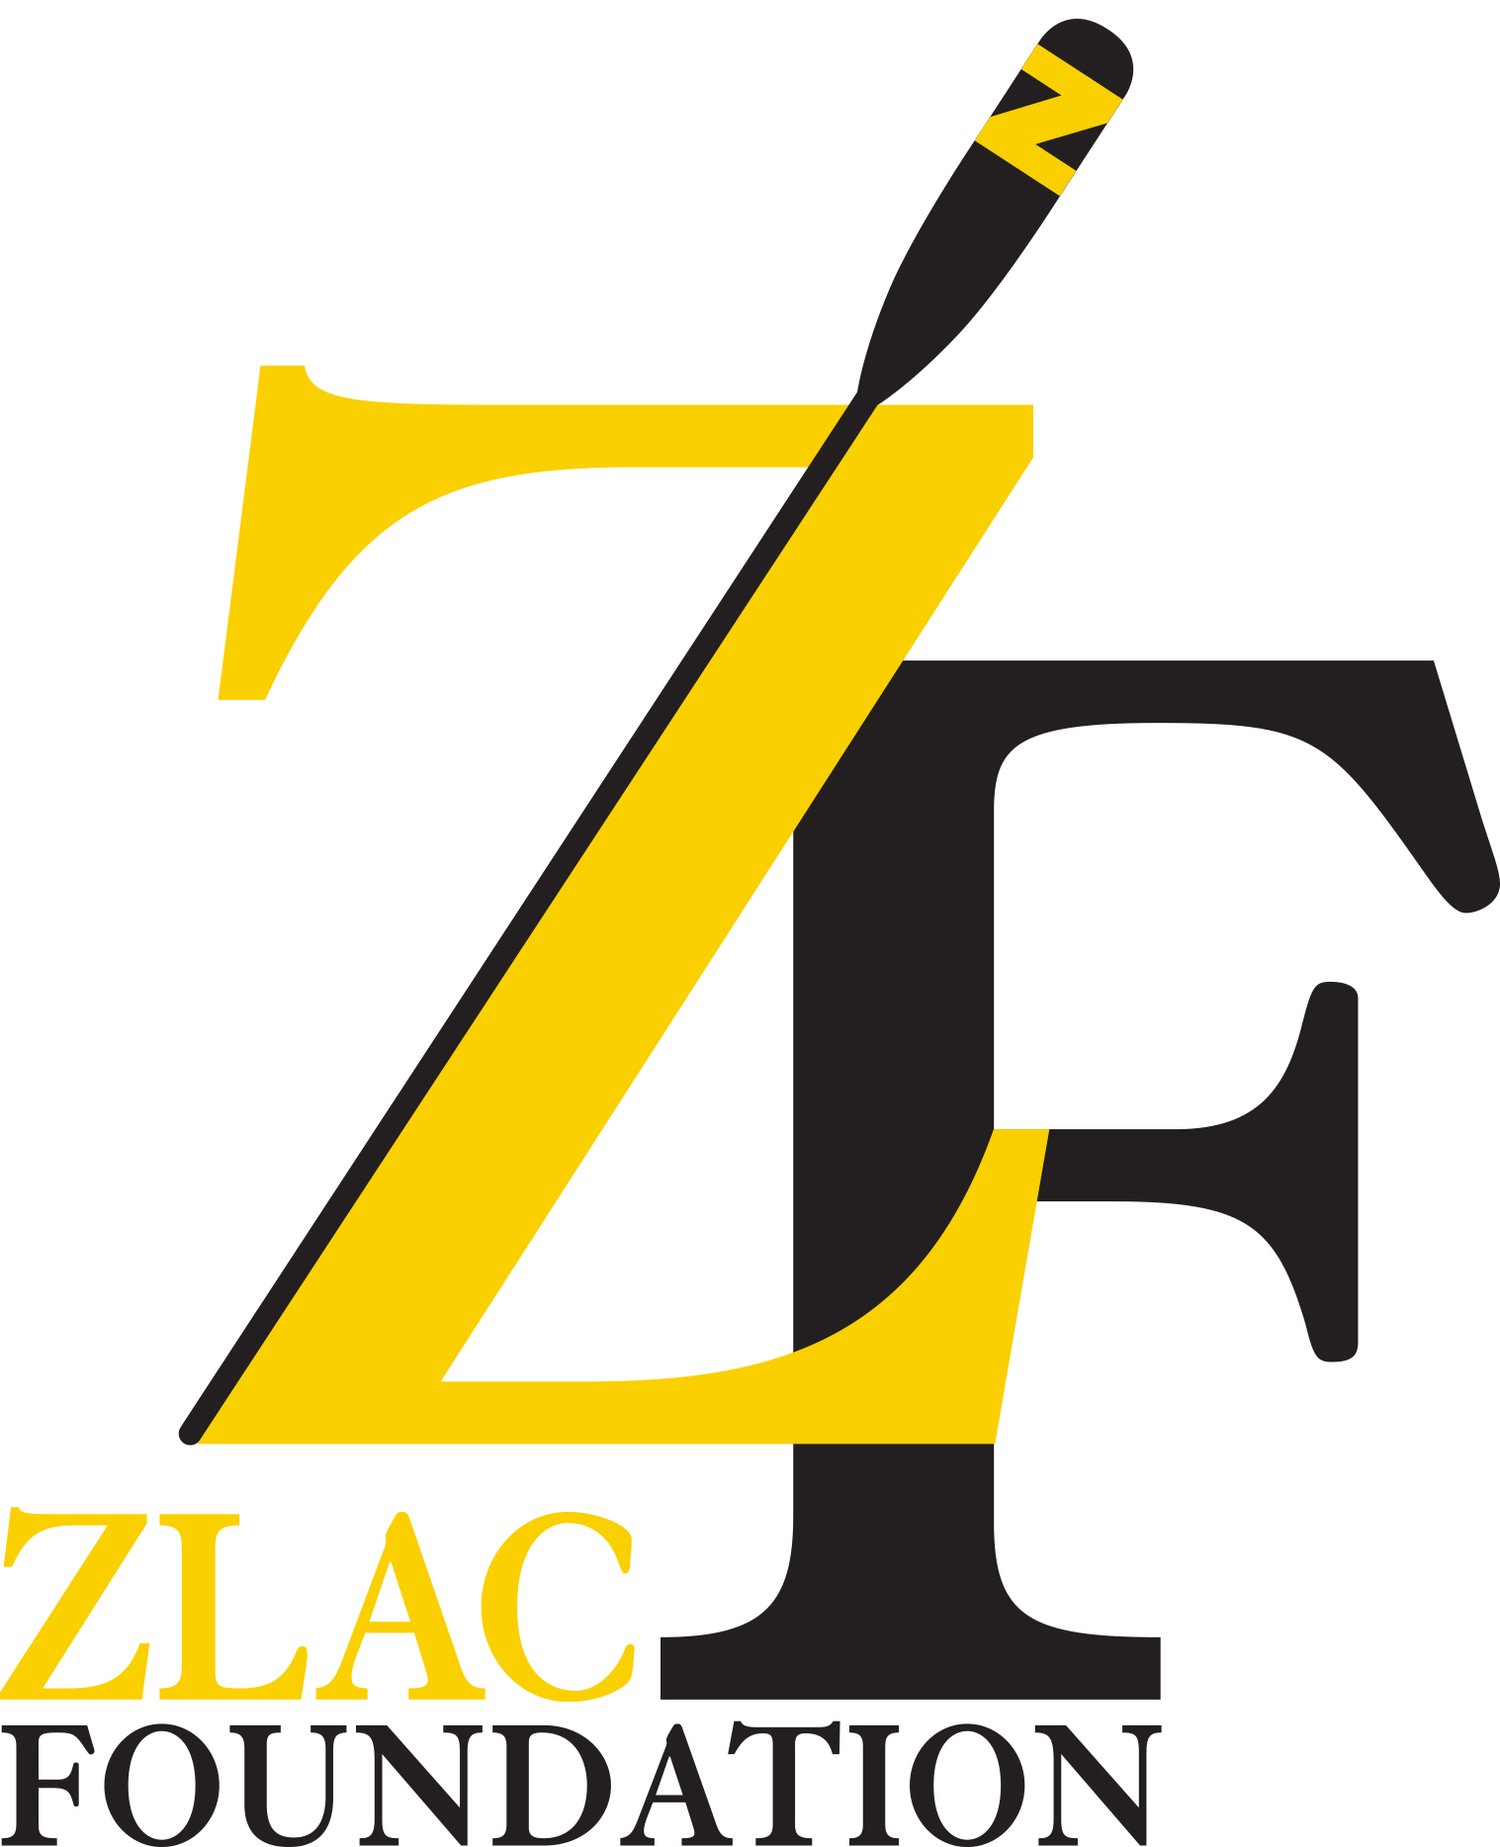 The ZLAC Foundation 